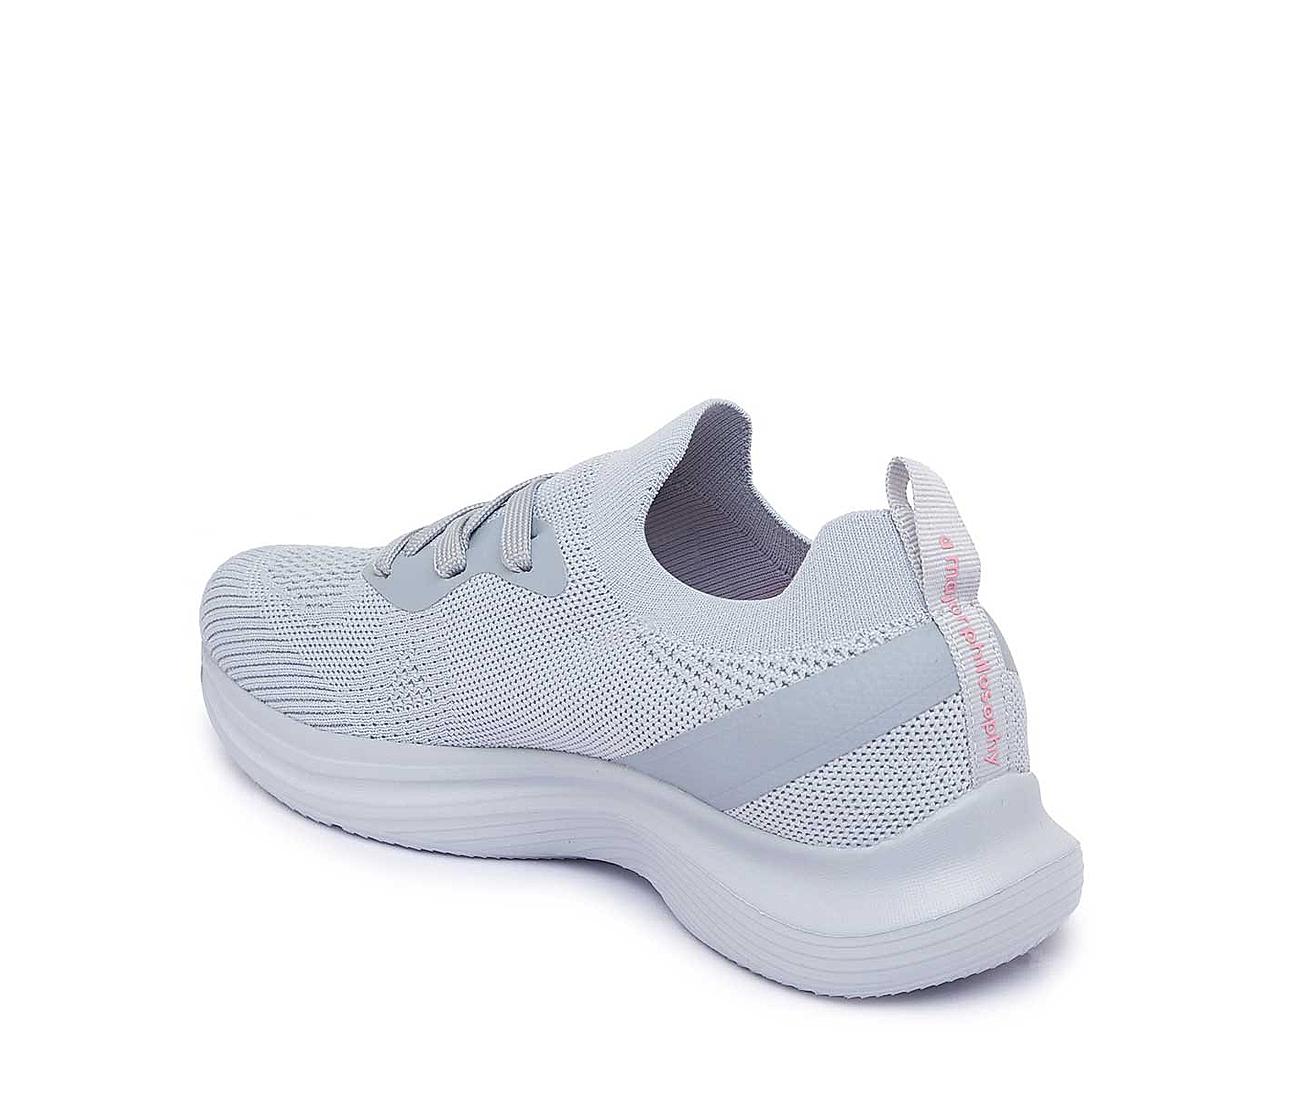 Led Shoes - Buy Led Shoes online in India